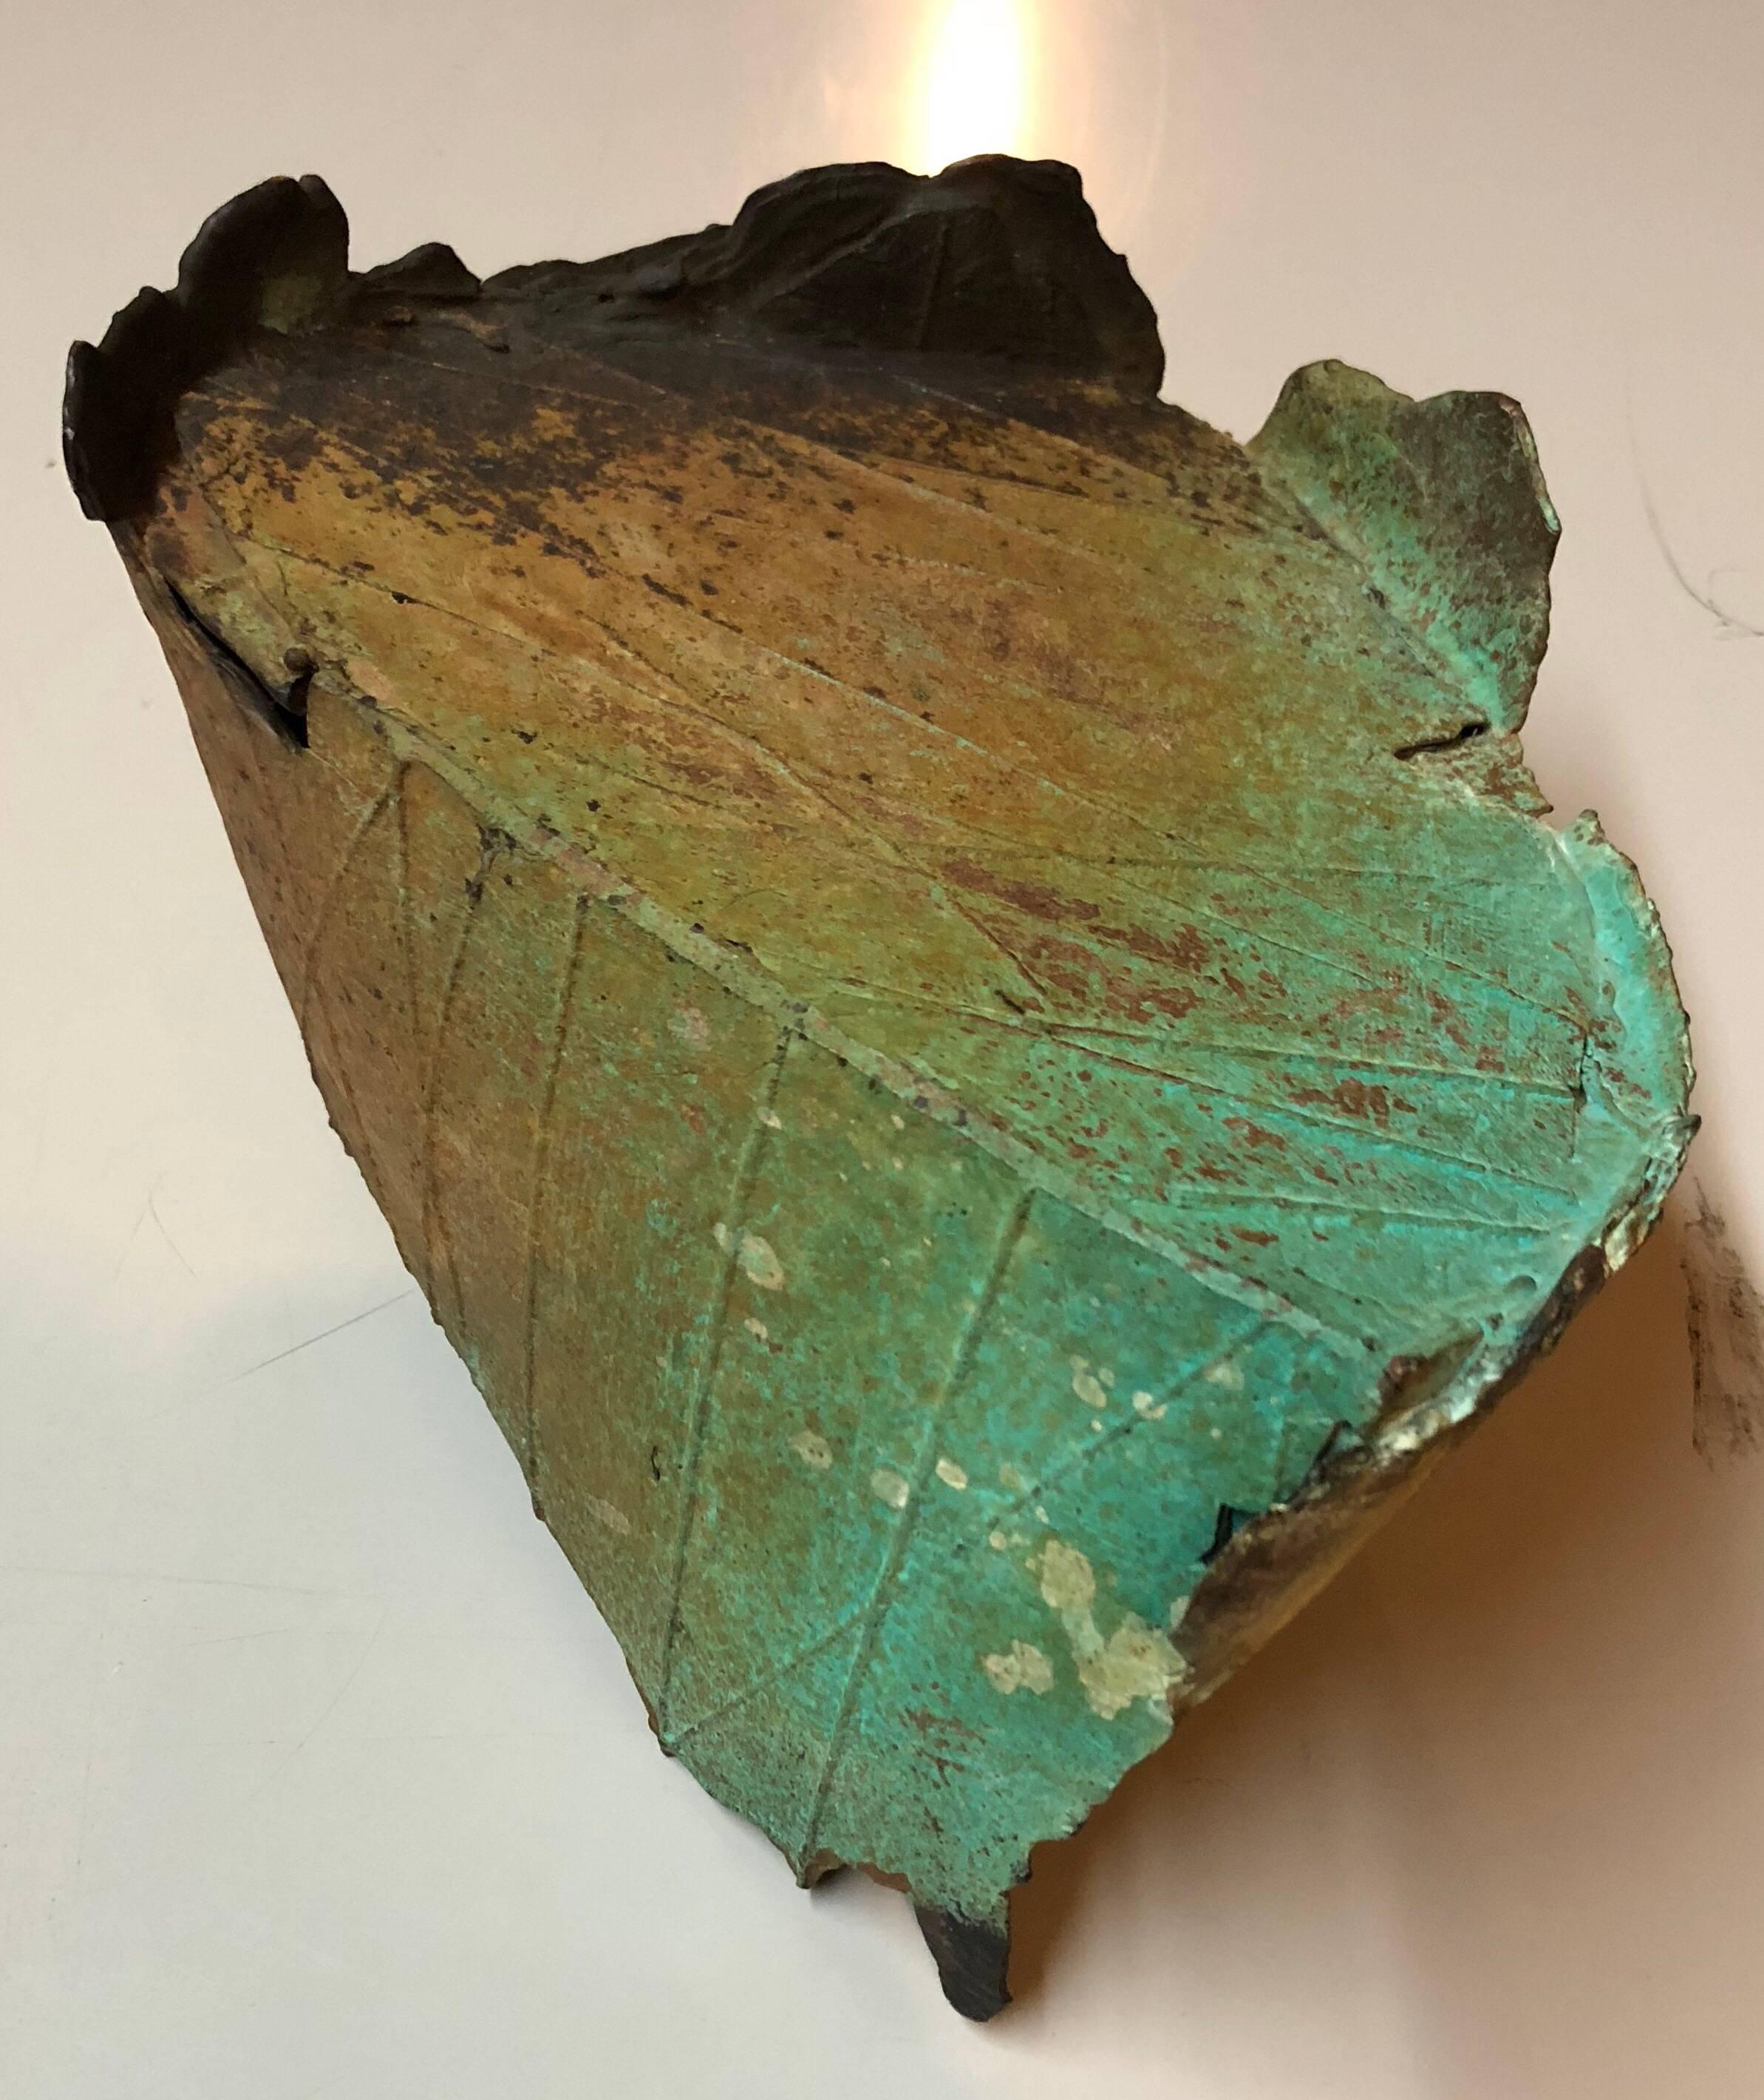 It has a variegated patina and texture to it. It does not appear to be signed. It was exhibited at Patricia Sweetow gallery in San Francisco.


Dennis Leon, was a San Francisco Bay Area sculptor and art instructor
Mr. Leon was chairman of the